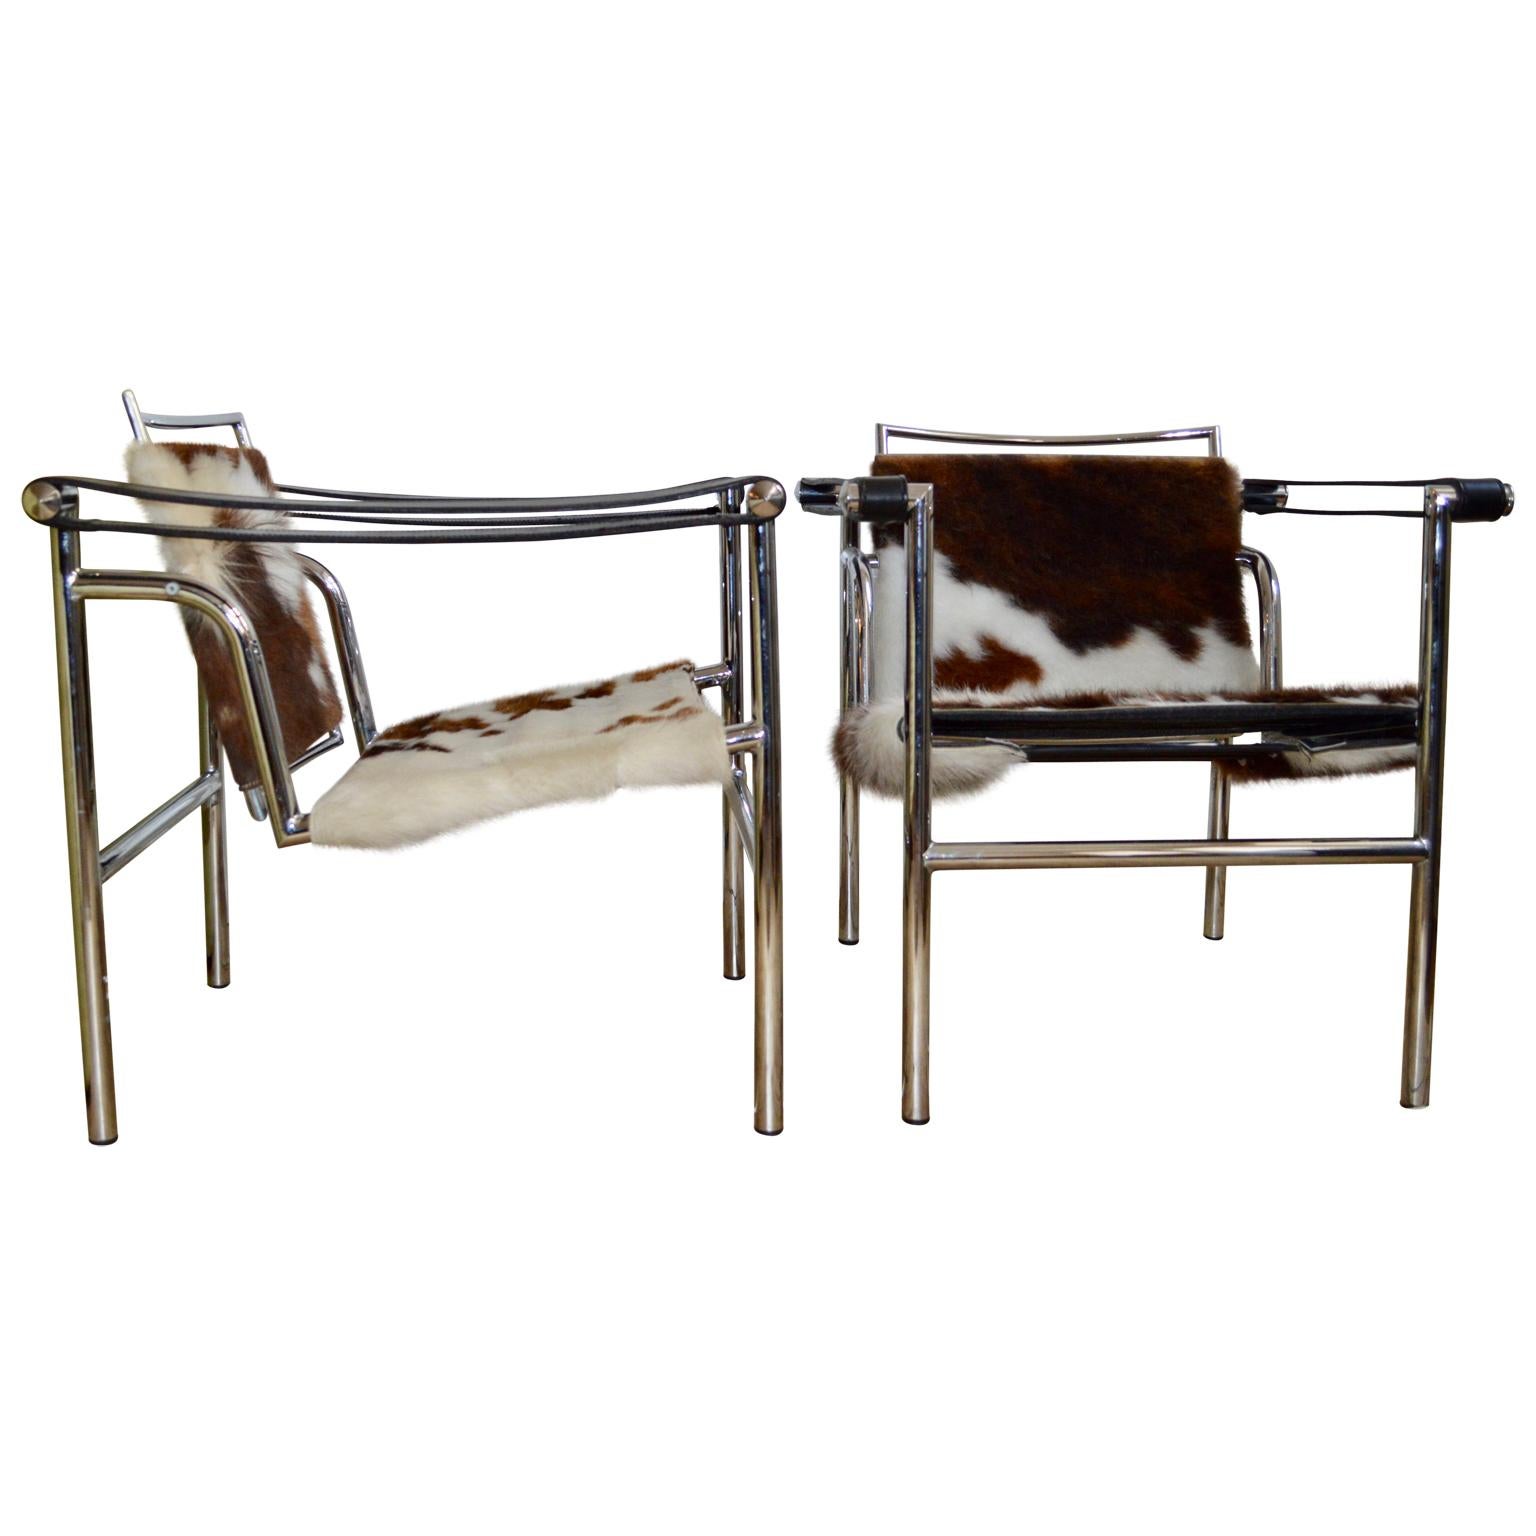 Pair of LC1 sling chairs in Pony skin.
Excellent 1980 examples of Le Corbusier's, Charlotte Perriand and Pierre Jeanneret, LC1 chair from 1928.